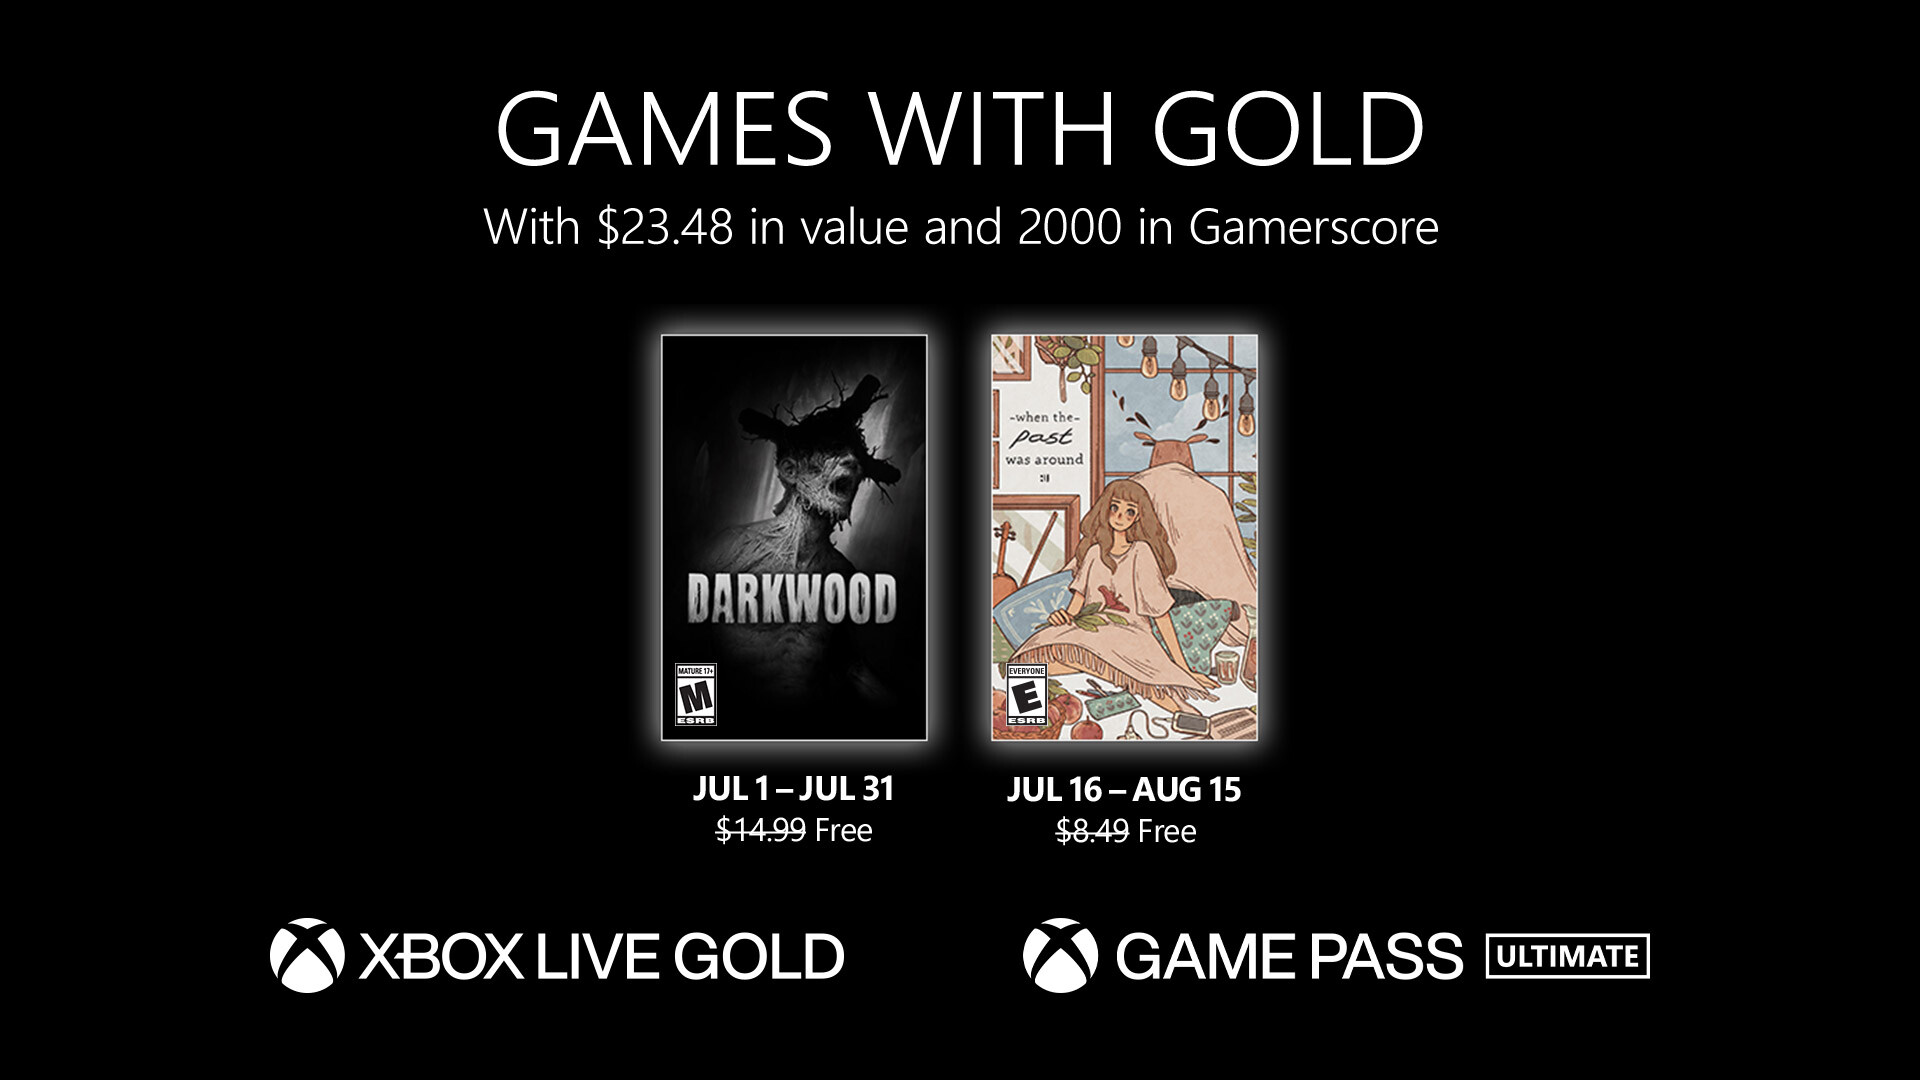 Xbox Game Pass Core comes this September to replace Live Gold